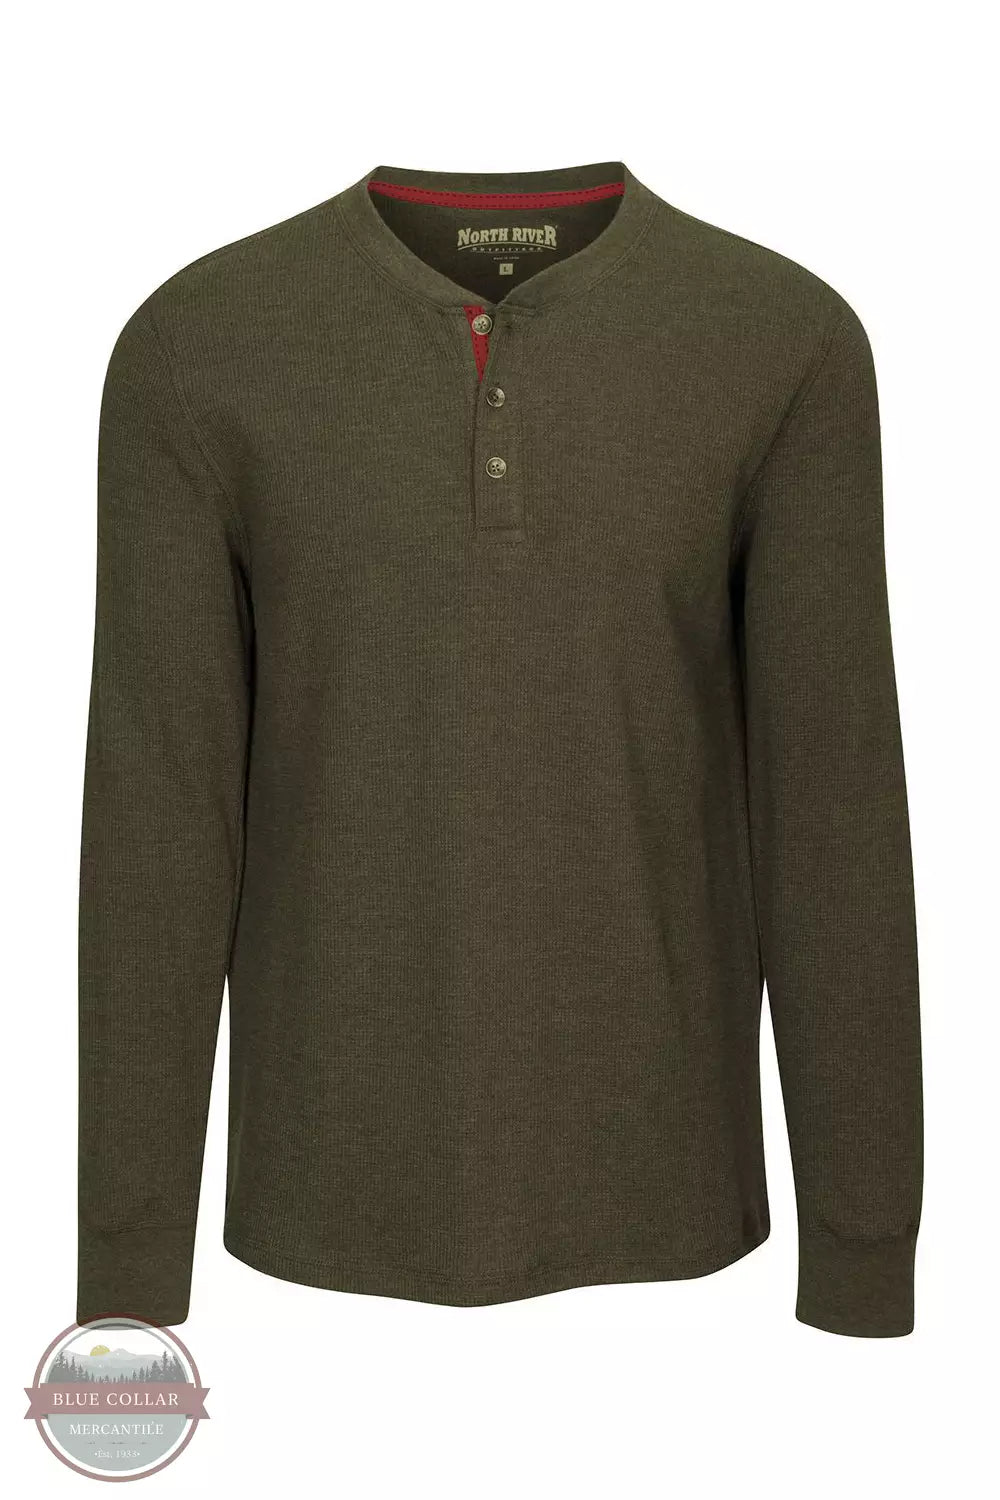 North River NRM2195 Heathered Waffle Long Sleeve Henley Olive Front View